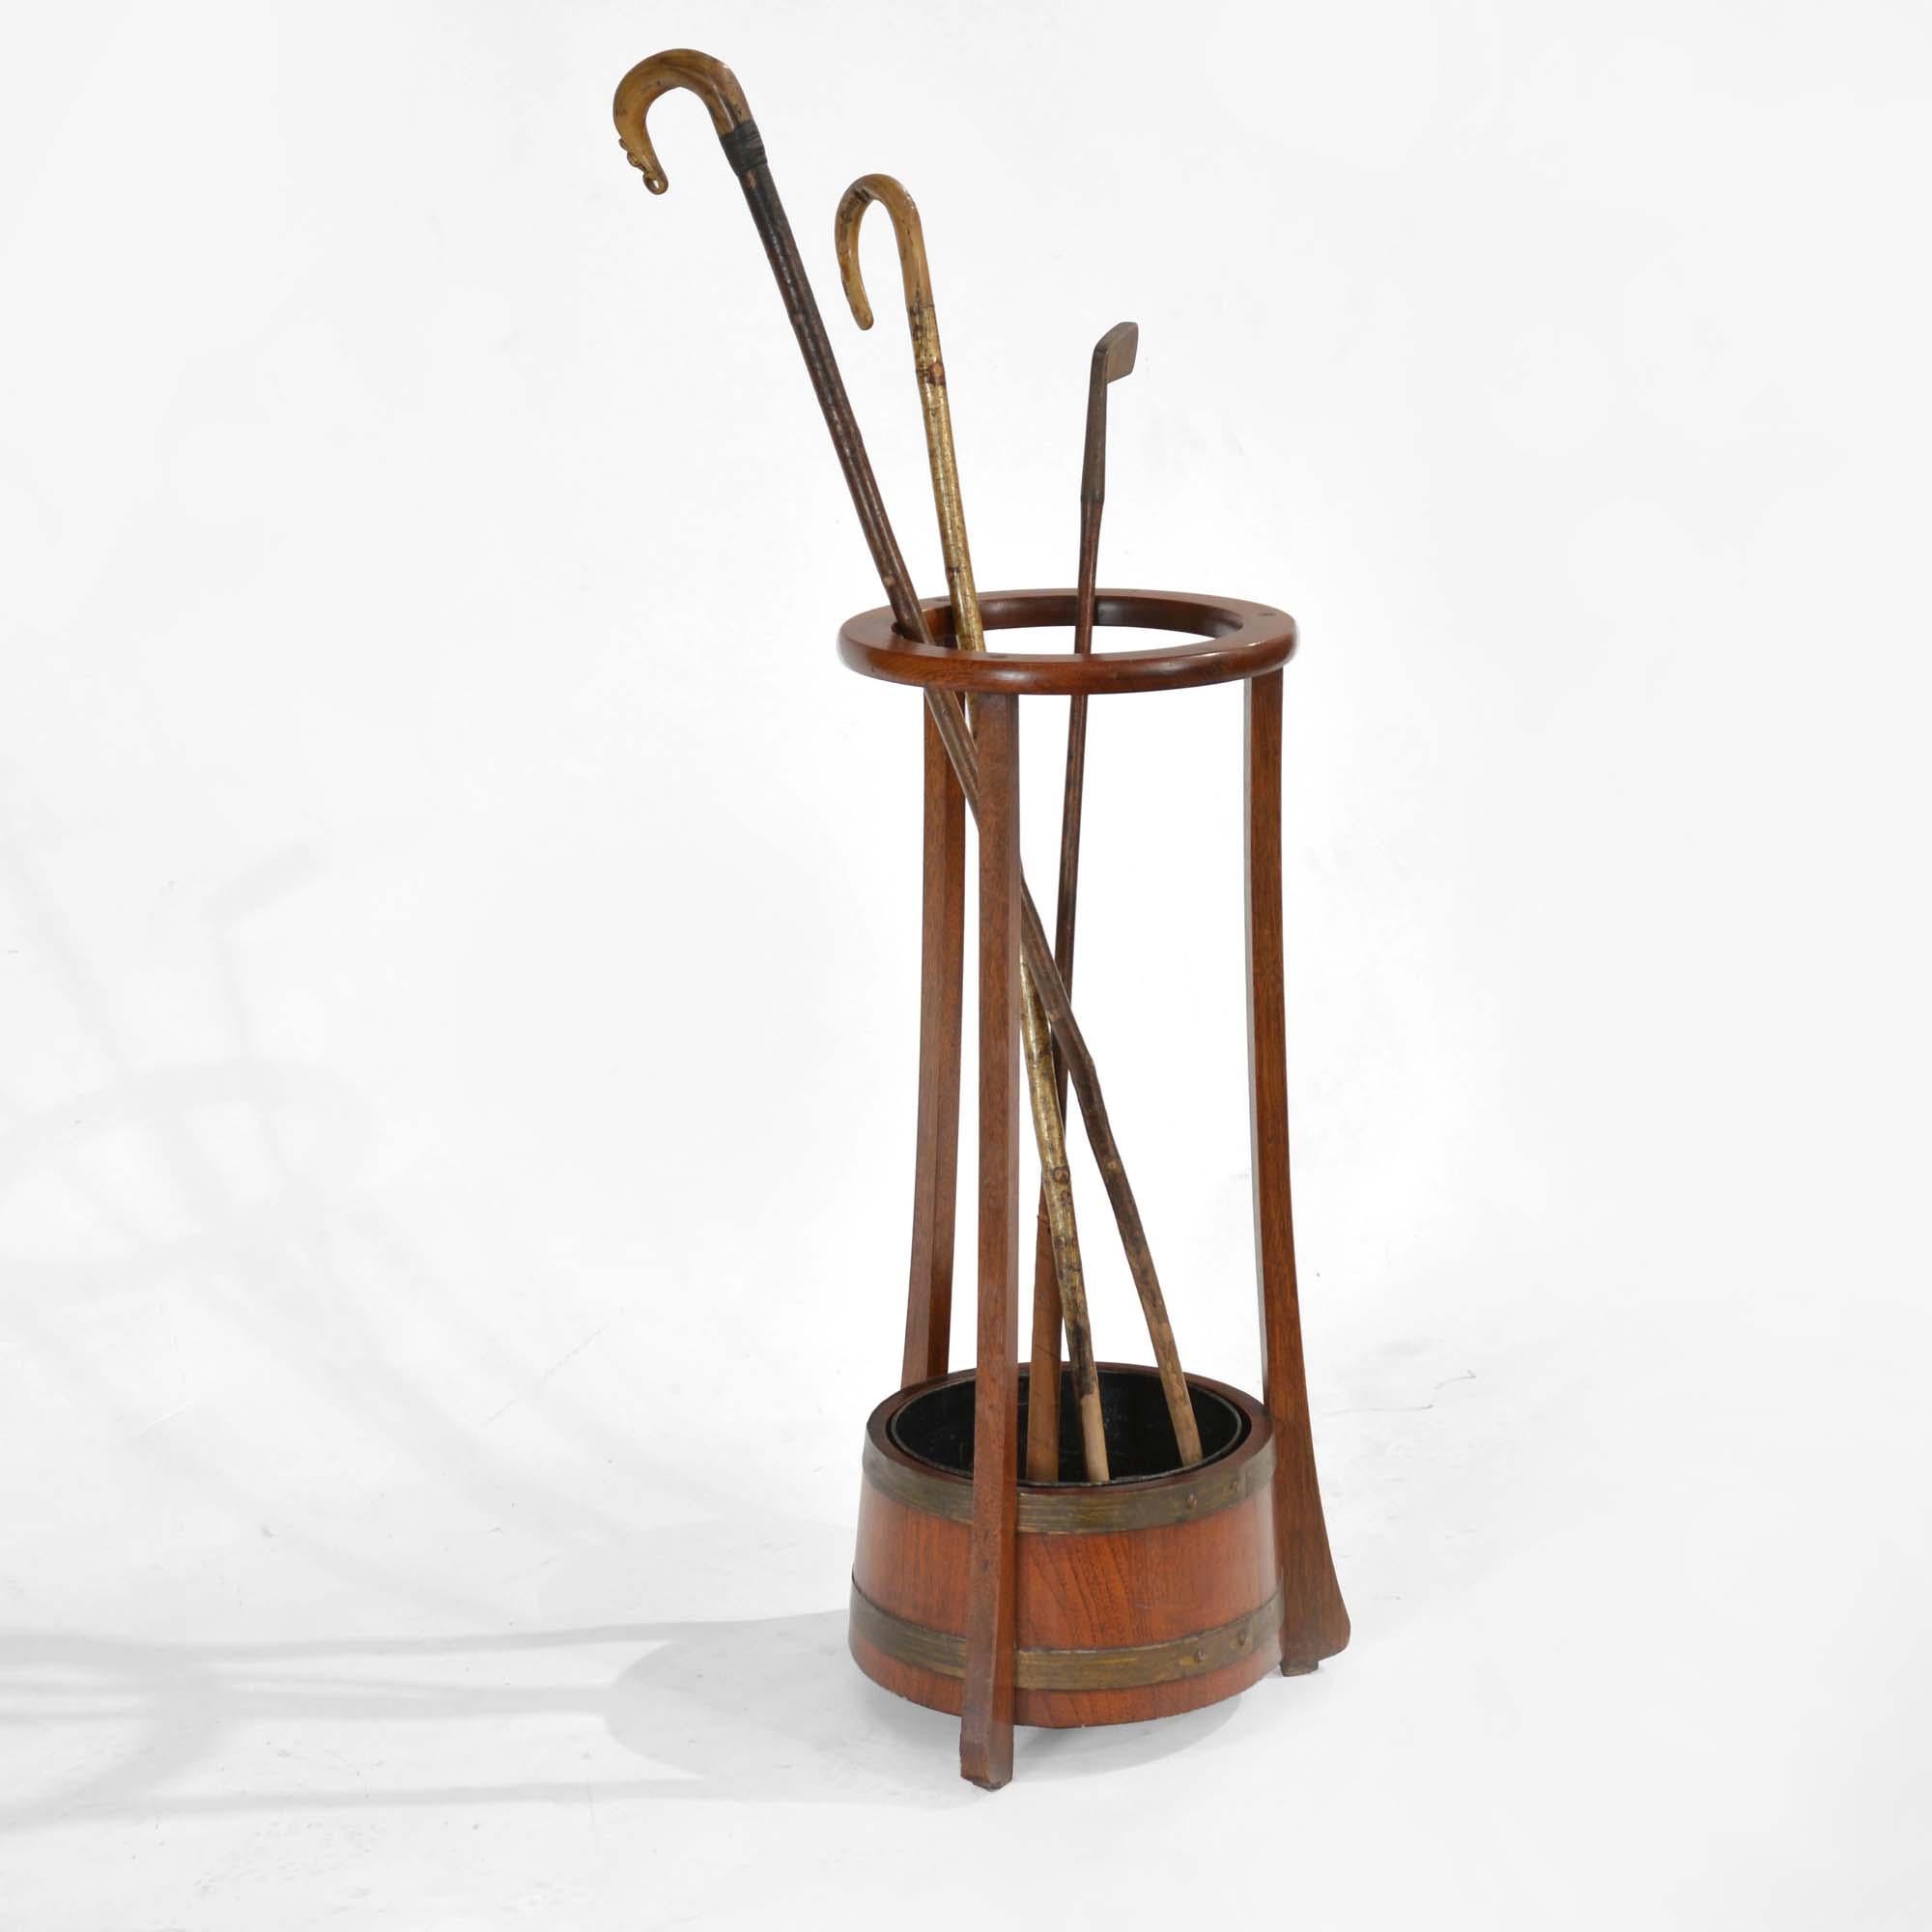 Teak Umbrella or Walking Stick Stand by R.A. Lister
Brass bound barrel base with a trio of supports to a circular top, stands on shaped feet.  With original removable black japanned tin liner (to catch water from the umbrella).  R.A. Lister & Co